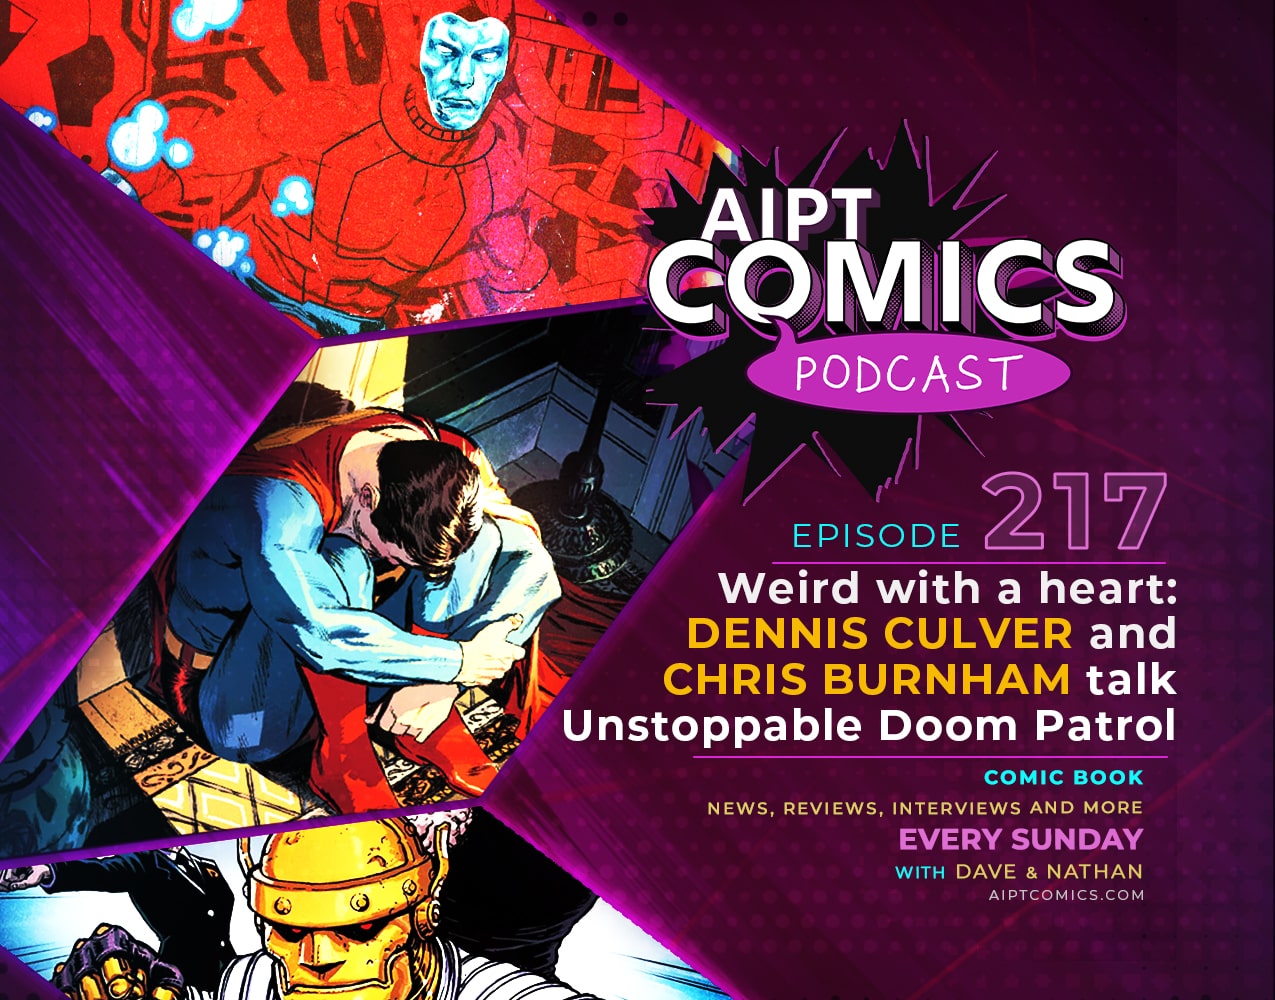 AIPT Comics Podcast episode 217: Weird with a heart: Dennis Culver and Chris Burnham untangle ‘Unstoppable Doom Patrol’